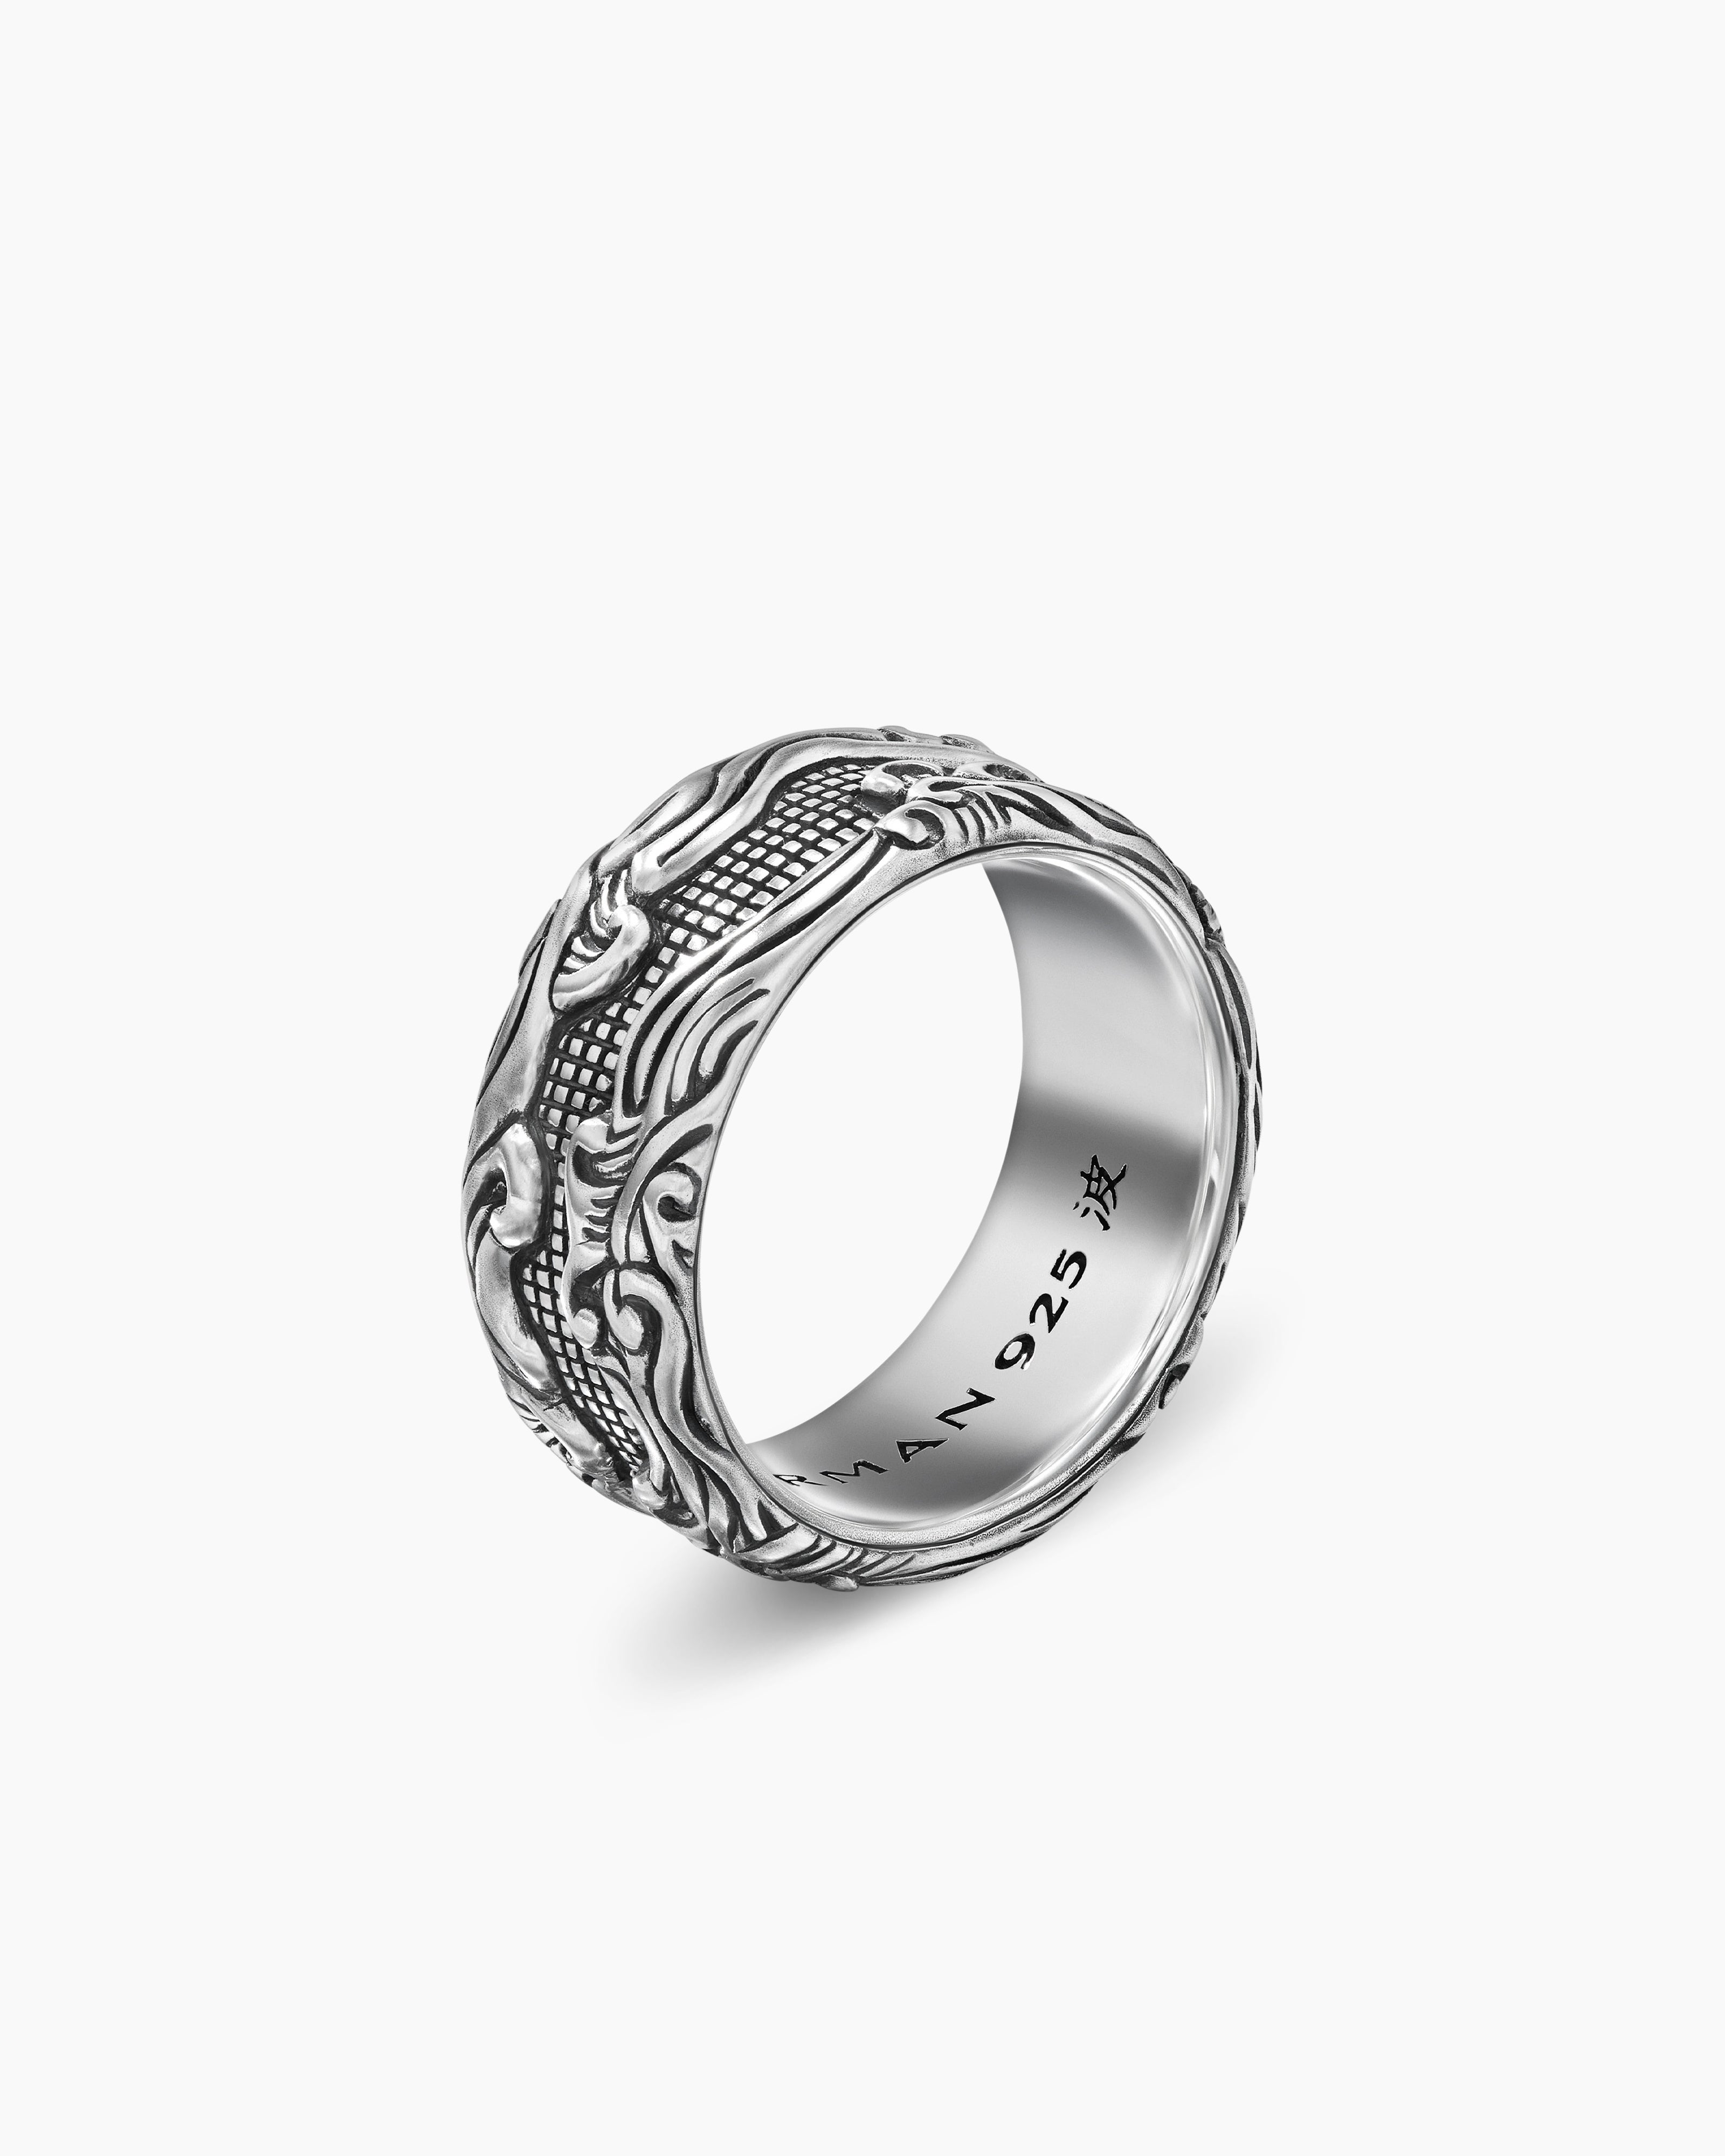 Waves Band Ring in Sterling Silver, 10mm